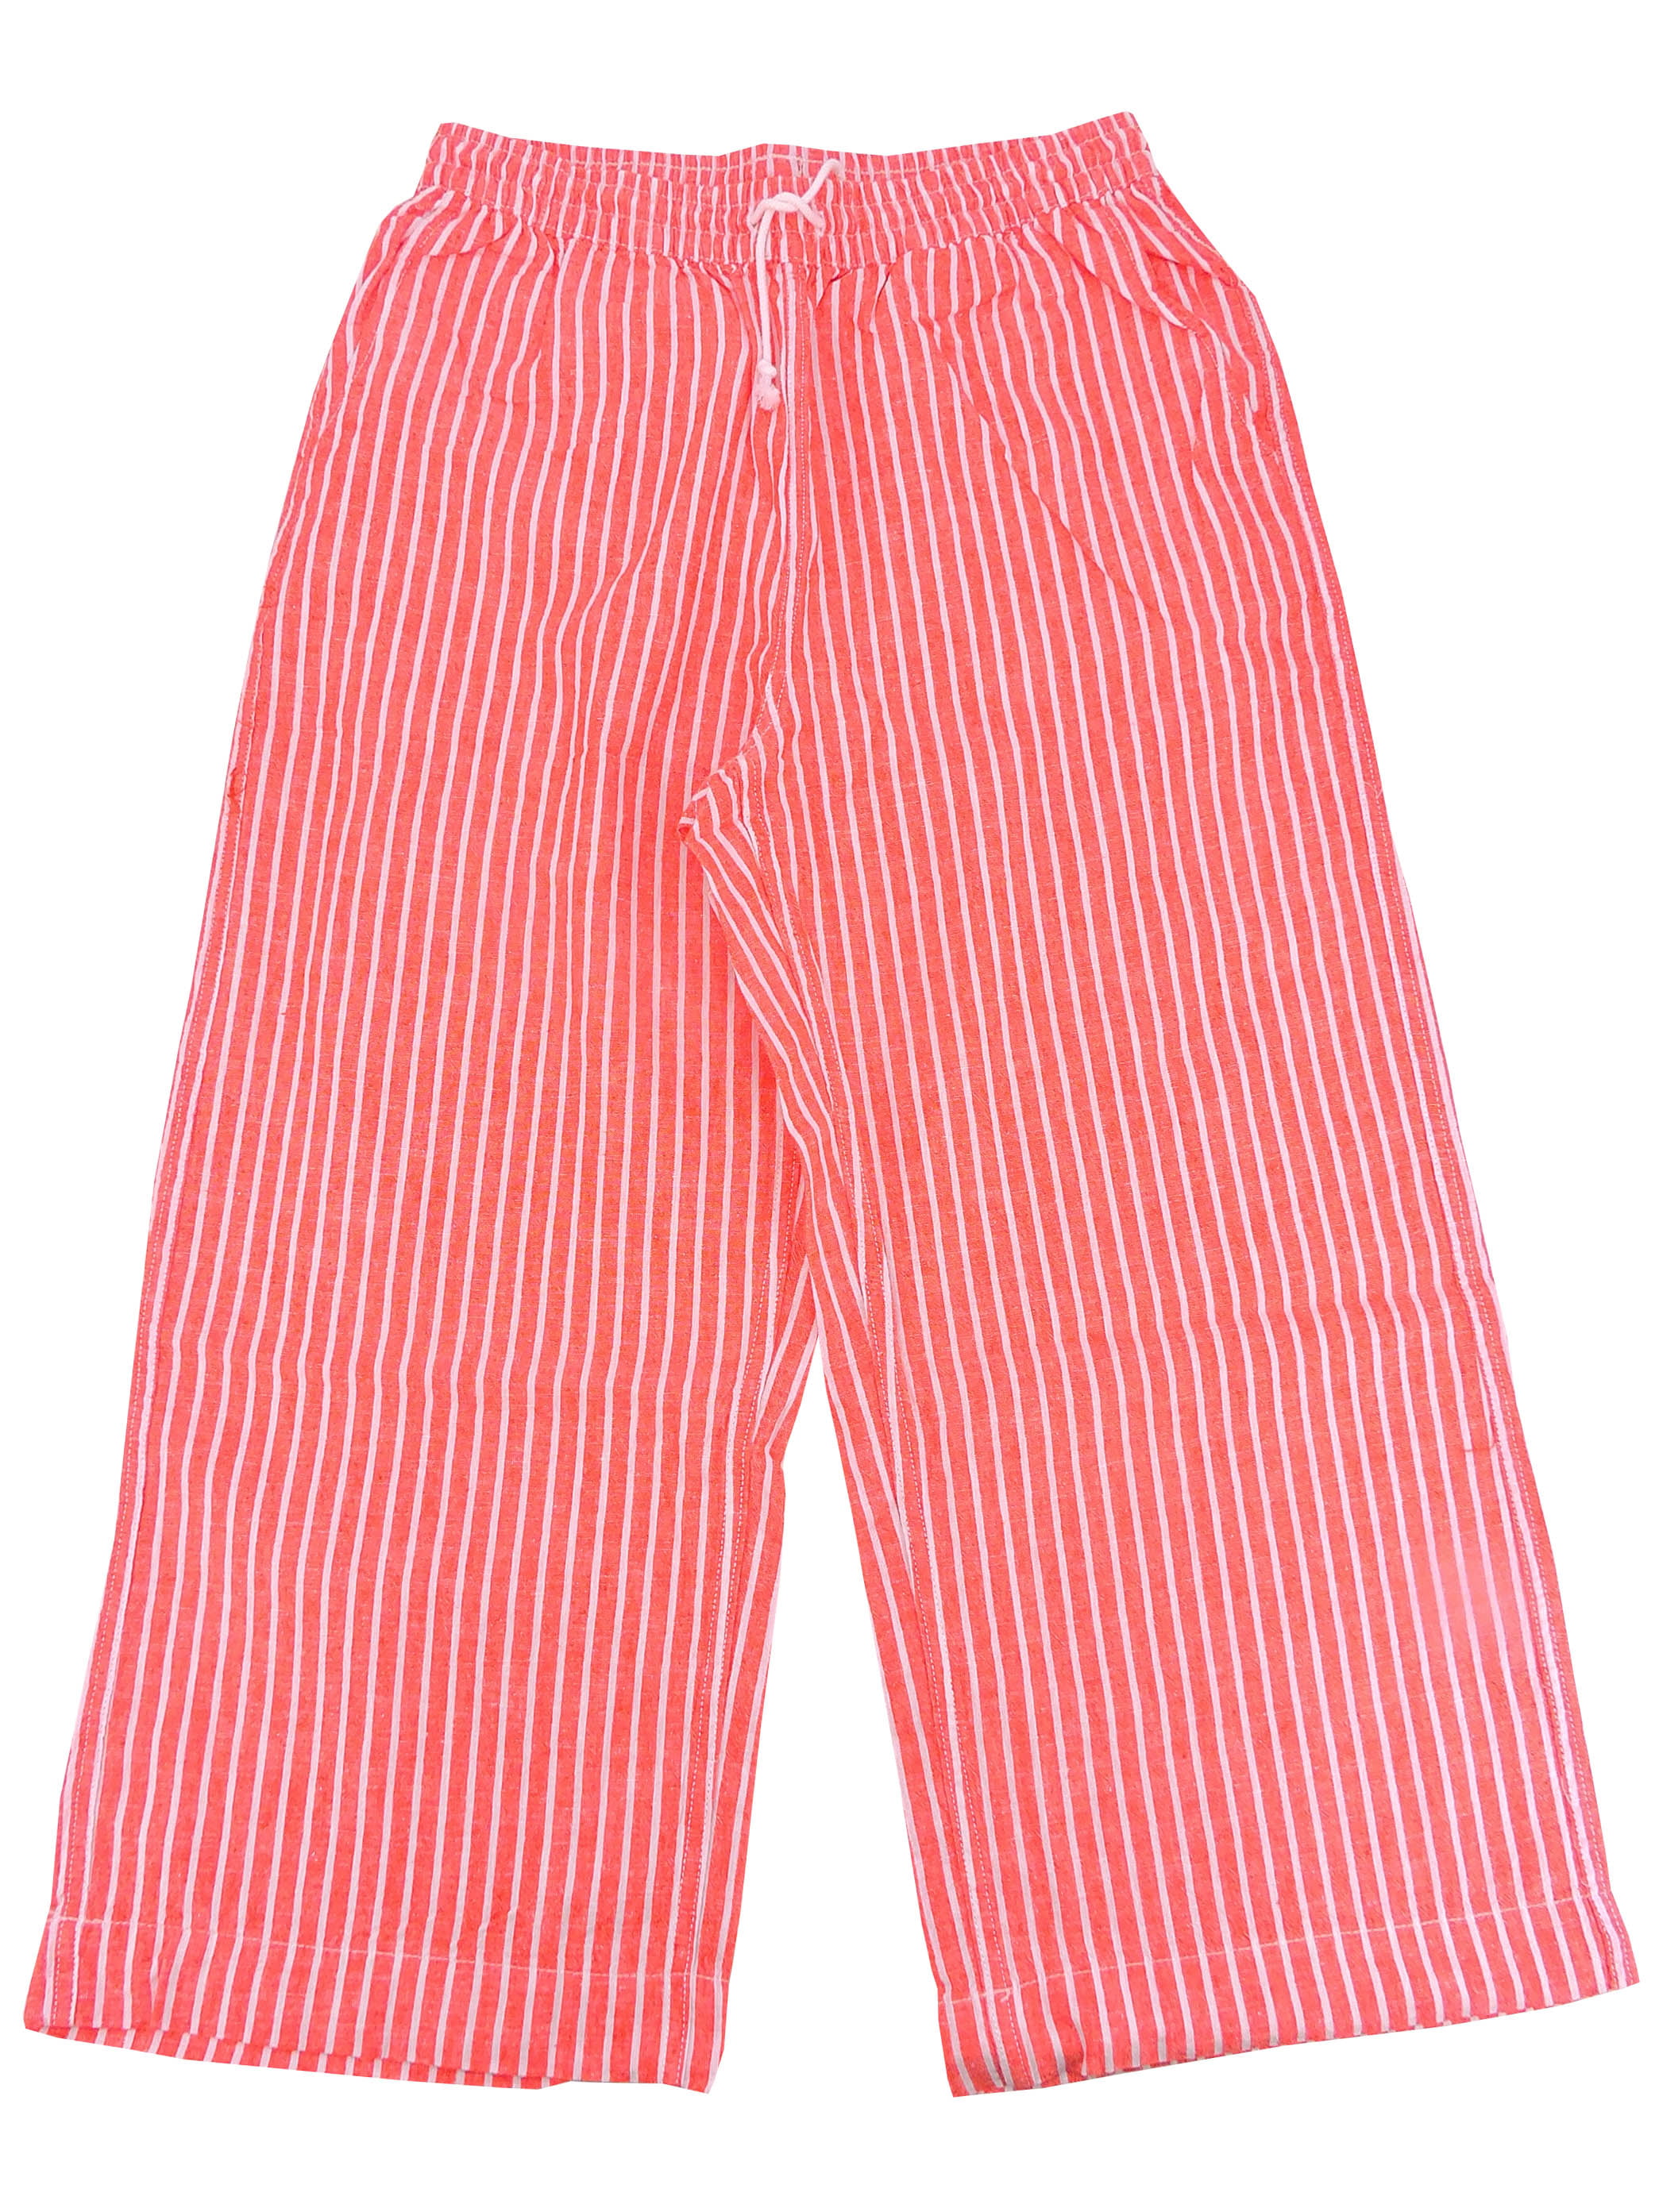 beachlunchlounge - Beach Lunch Lounge Women's Guava Striped Tapered ...